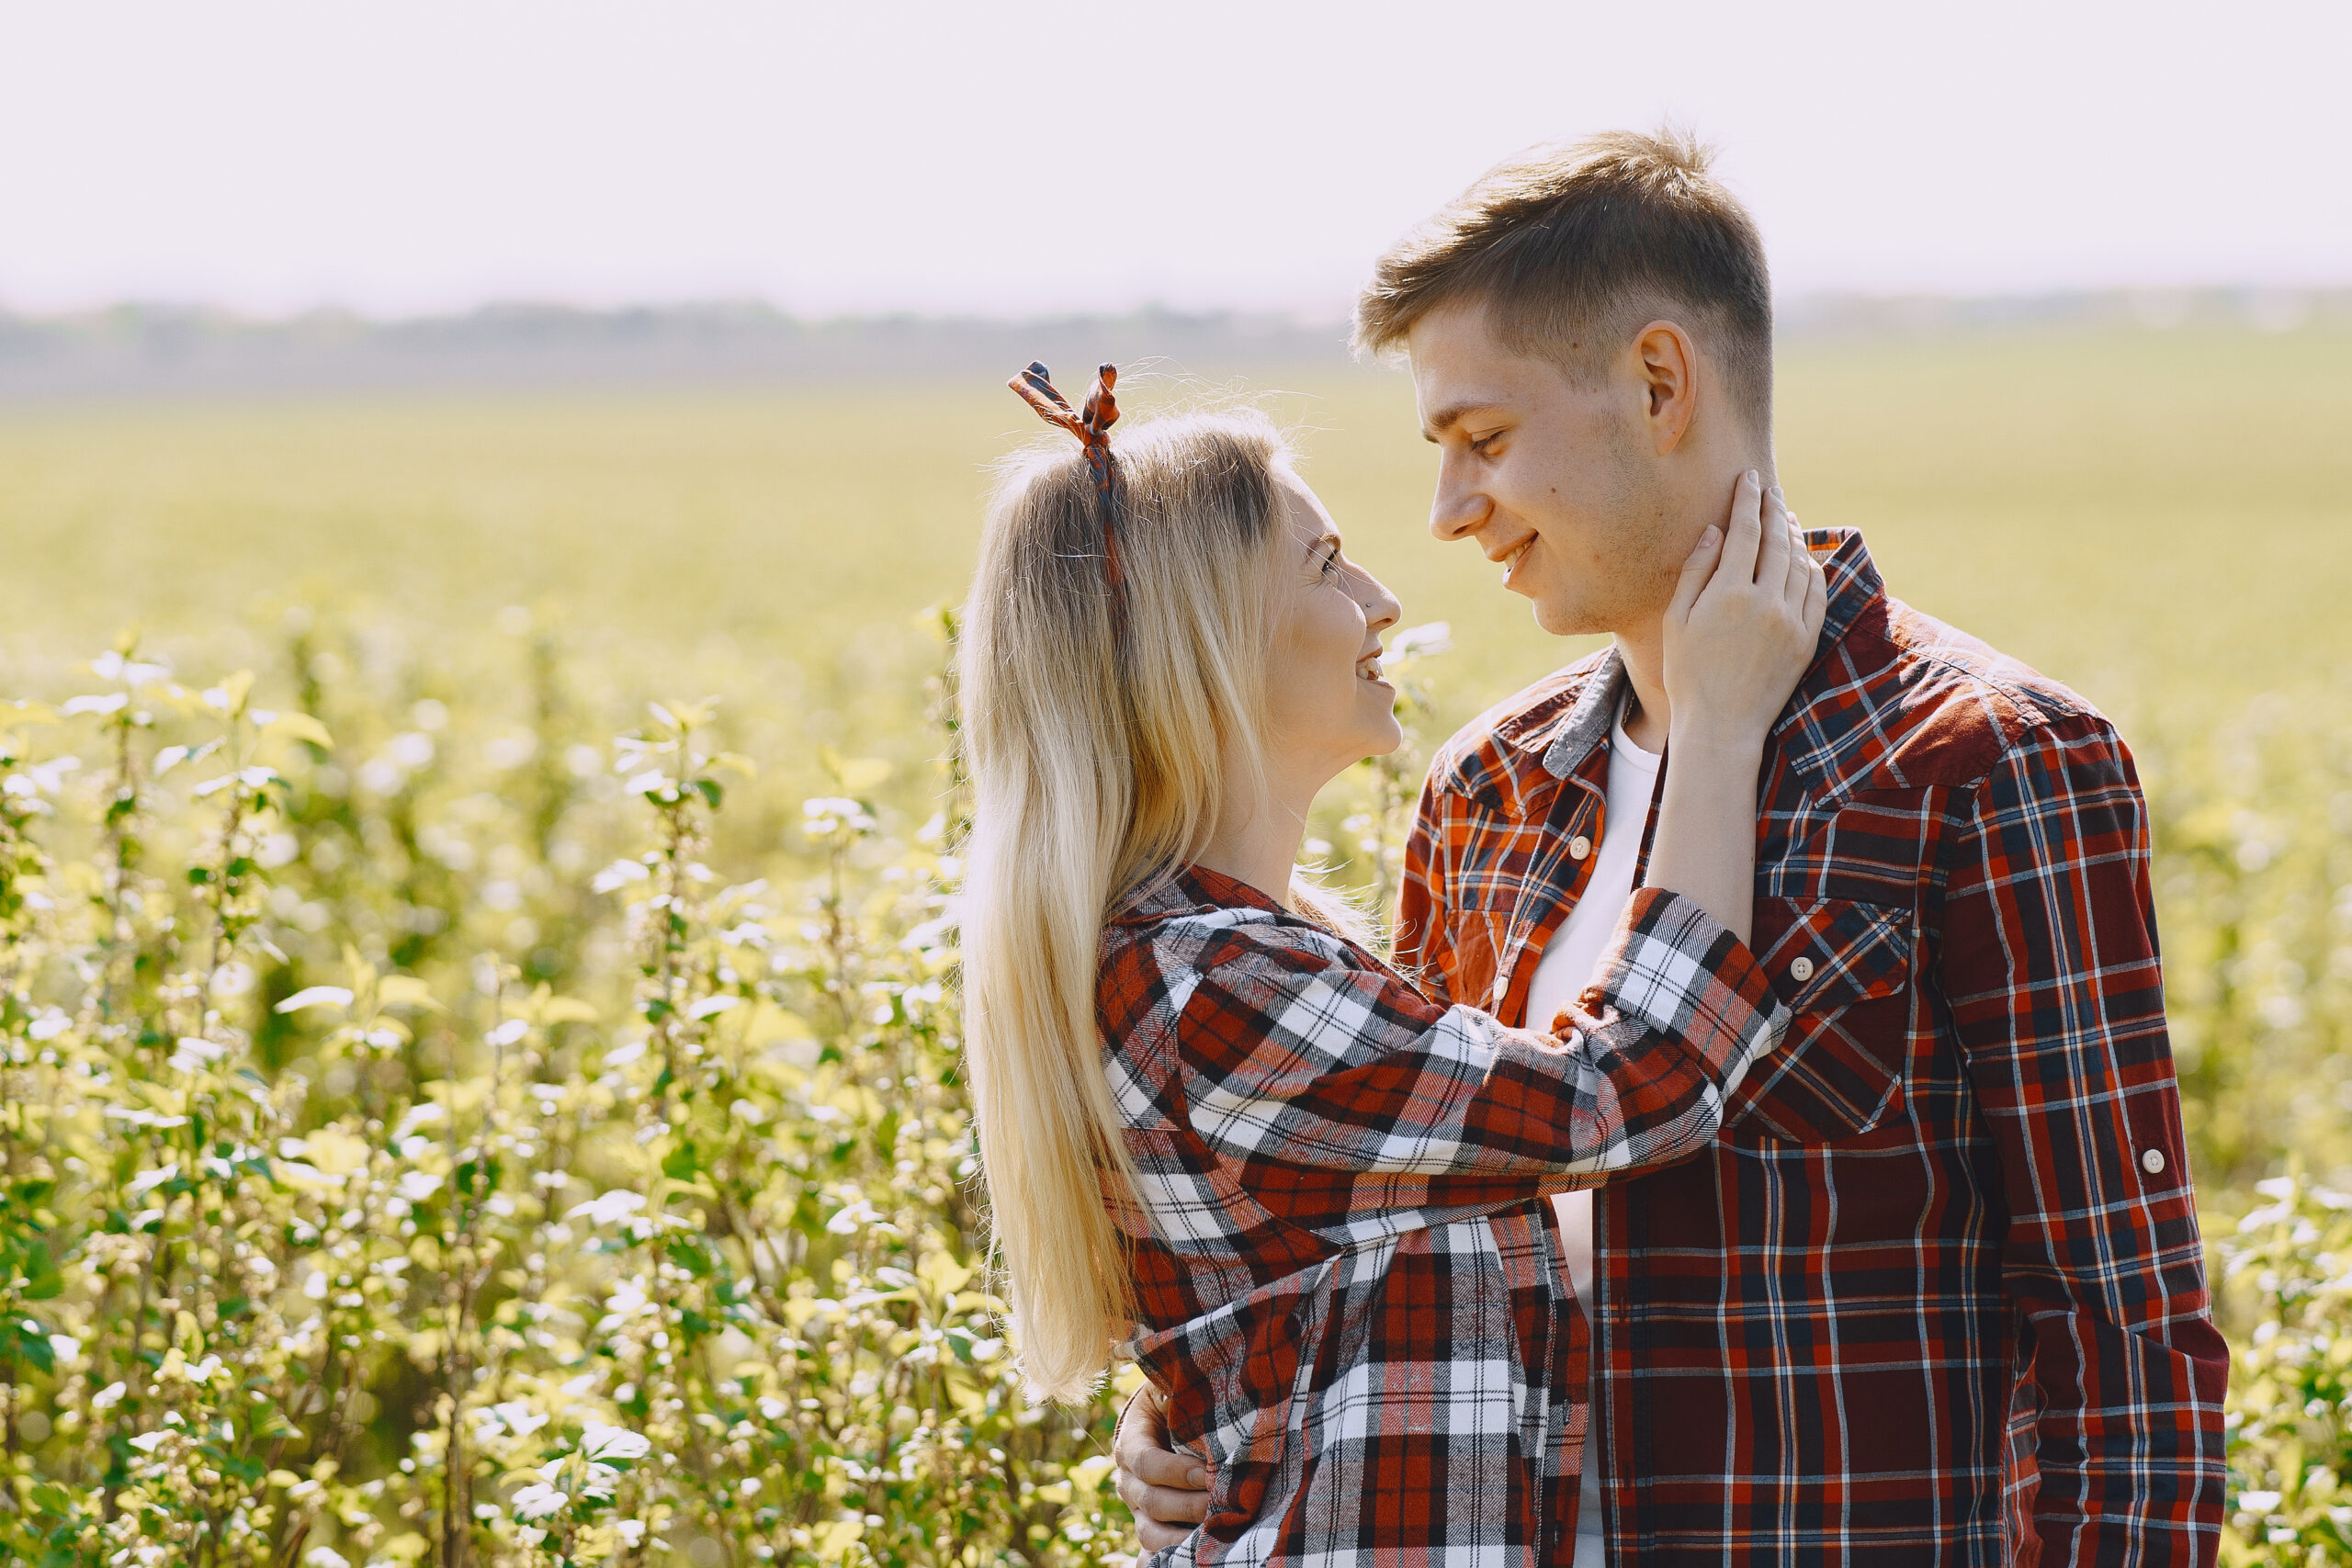 href="https://ru.freepik.com/free-photo/young-man-and-woman-couple-in-a-summer-field_9245958.htm#page=2&query=%D0%BF%D0%B0%D1%80%D0%B5%D0%BD%D1%8C%20%D1%86%D0%B5%D0%BB%D1%83%D0%B5%D1%82%20%D0%B4%D0%B5%D0%B2%D0%BA%D1%83%20%D0%BD%D0%B0%20%D1%81%D0%B5%D0%BD%D0%BE%D0%B2%D0%B0%D0%BB%D0%B5&position=11&from_view=search&track=ais